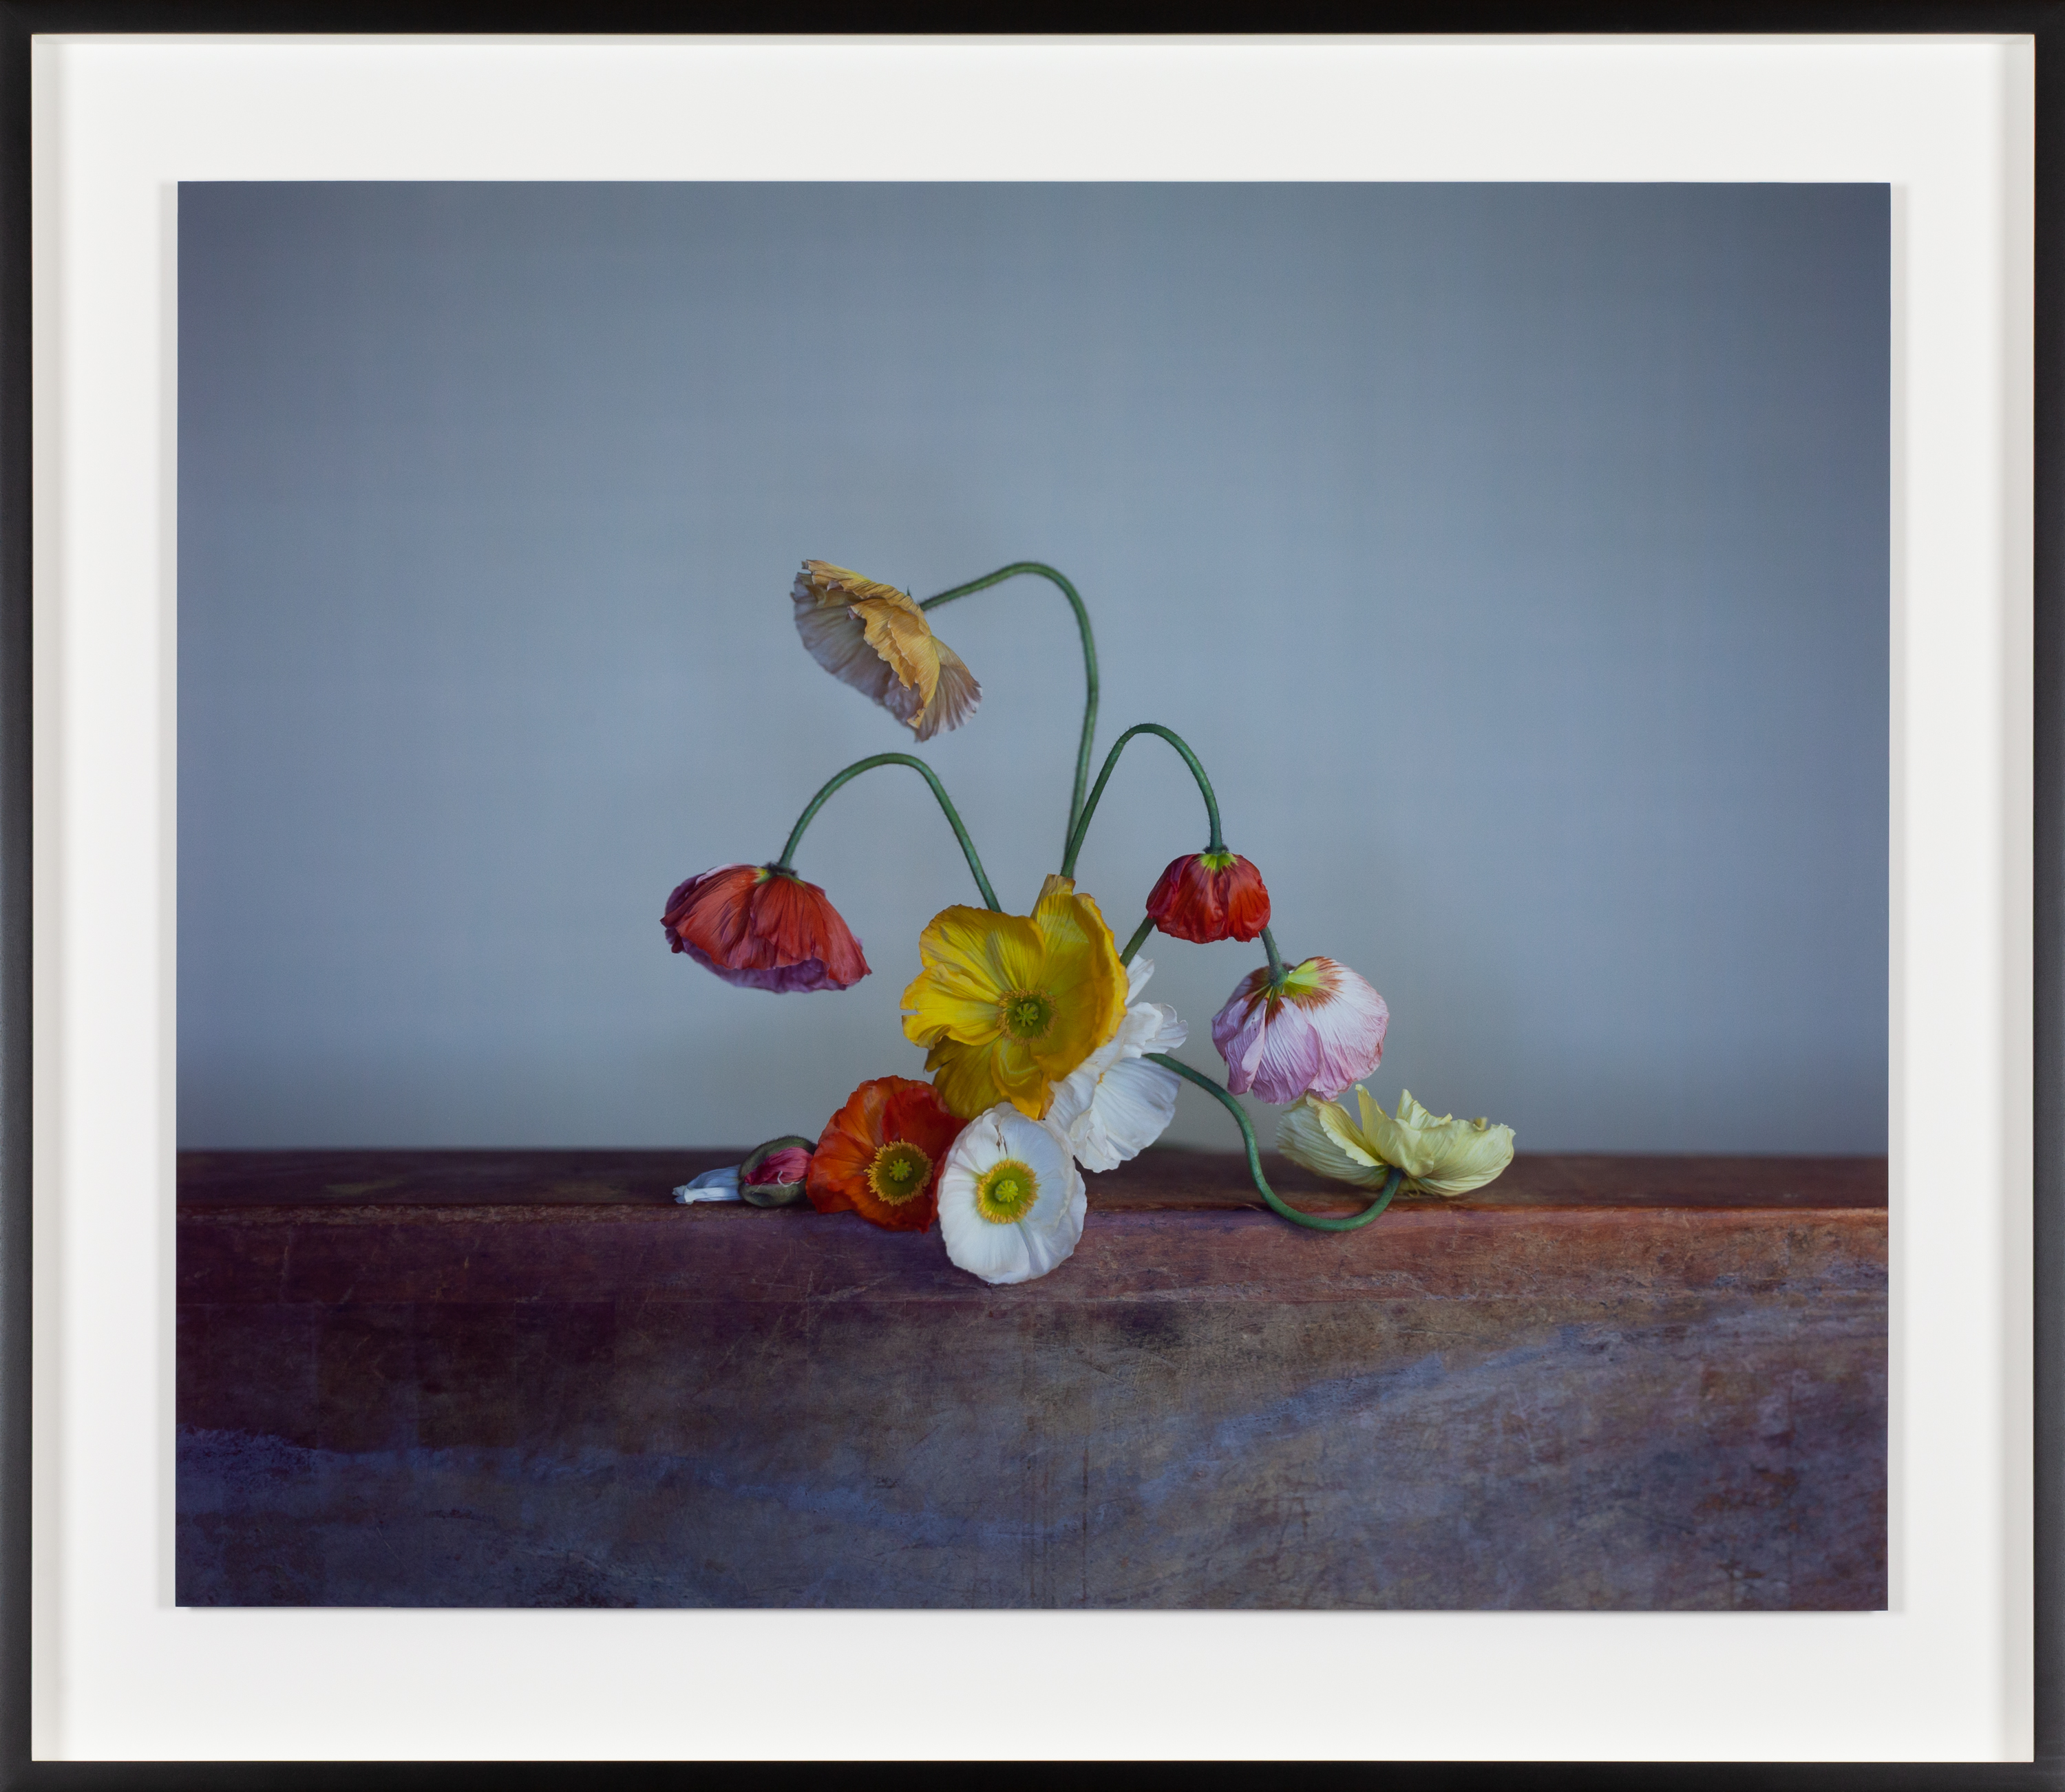 Color photograph of several poppies in states of decay on metal plinth framed in black